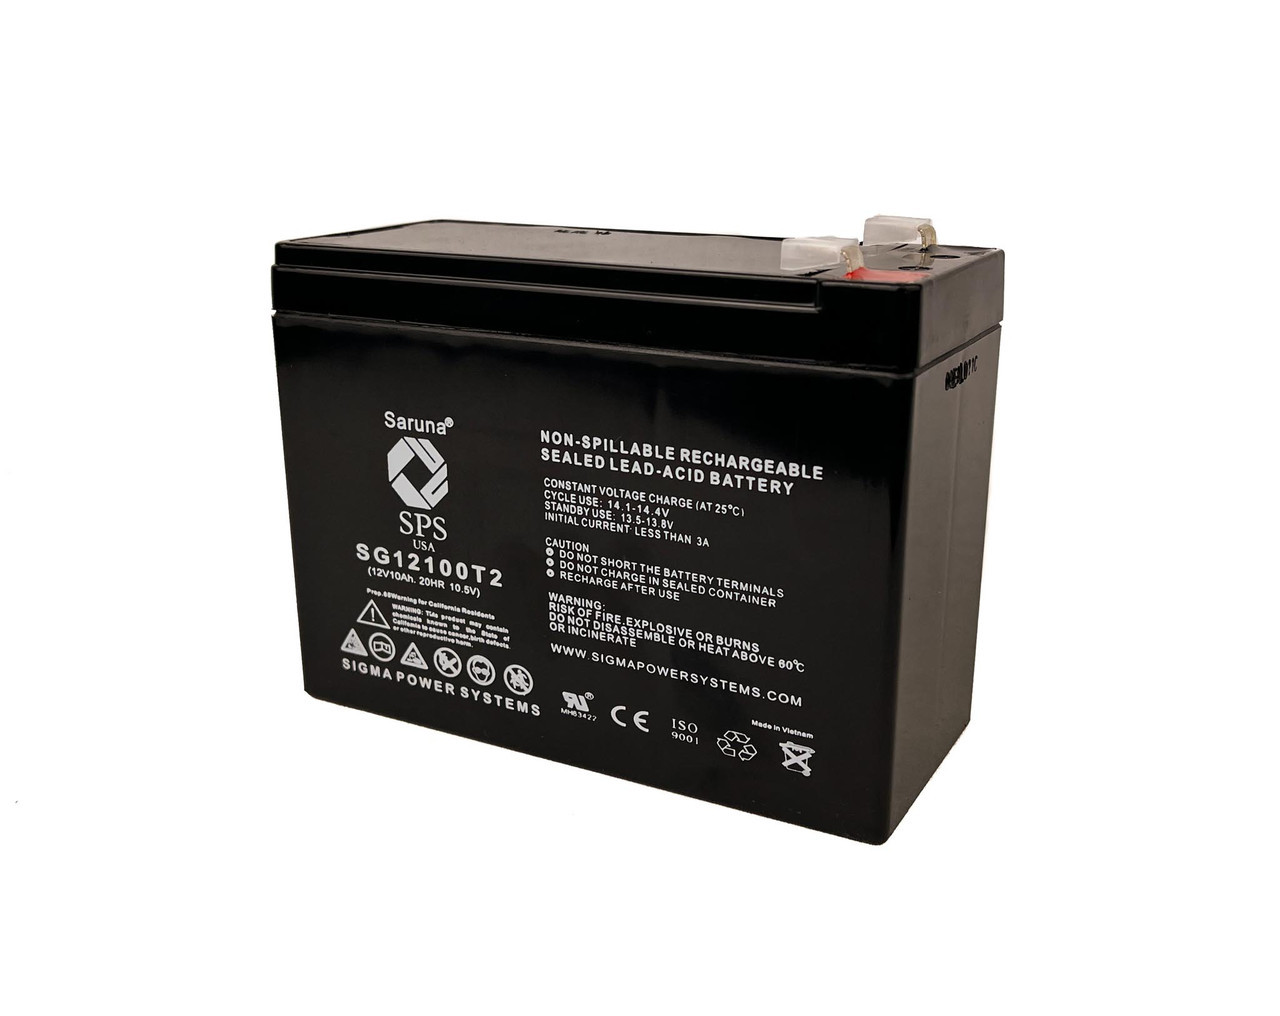 Raion Power 12V 10Ah Non-Spillable Replacement UPS Battery for CyberPower 1500VA PP1500SWT2